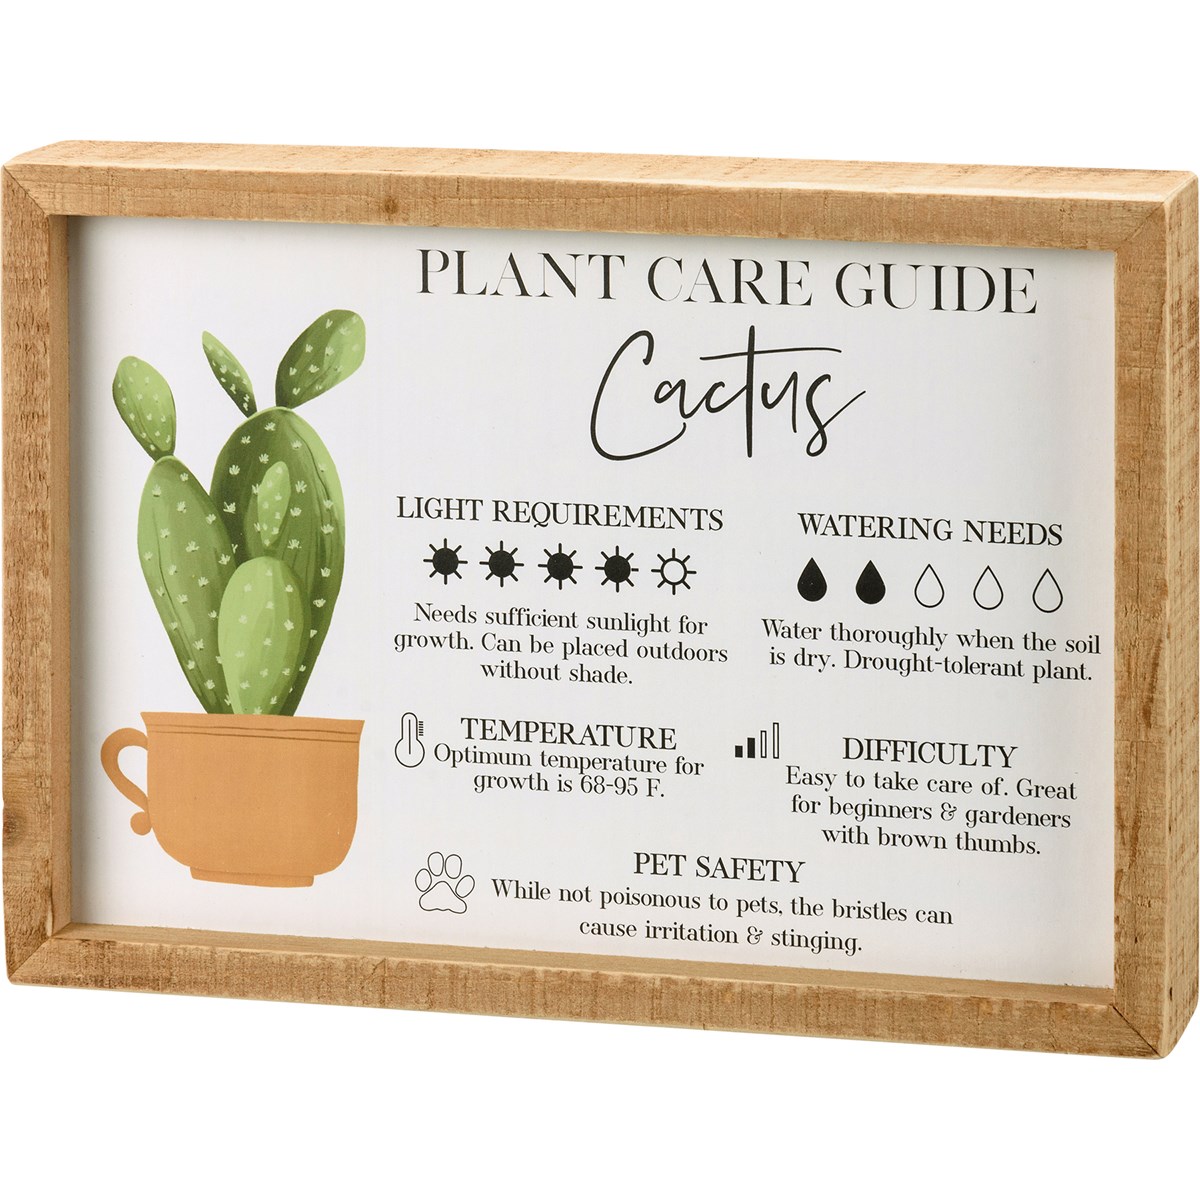 Cactus Guide Inset Box Sign - Wood, Paper